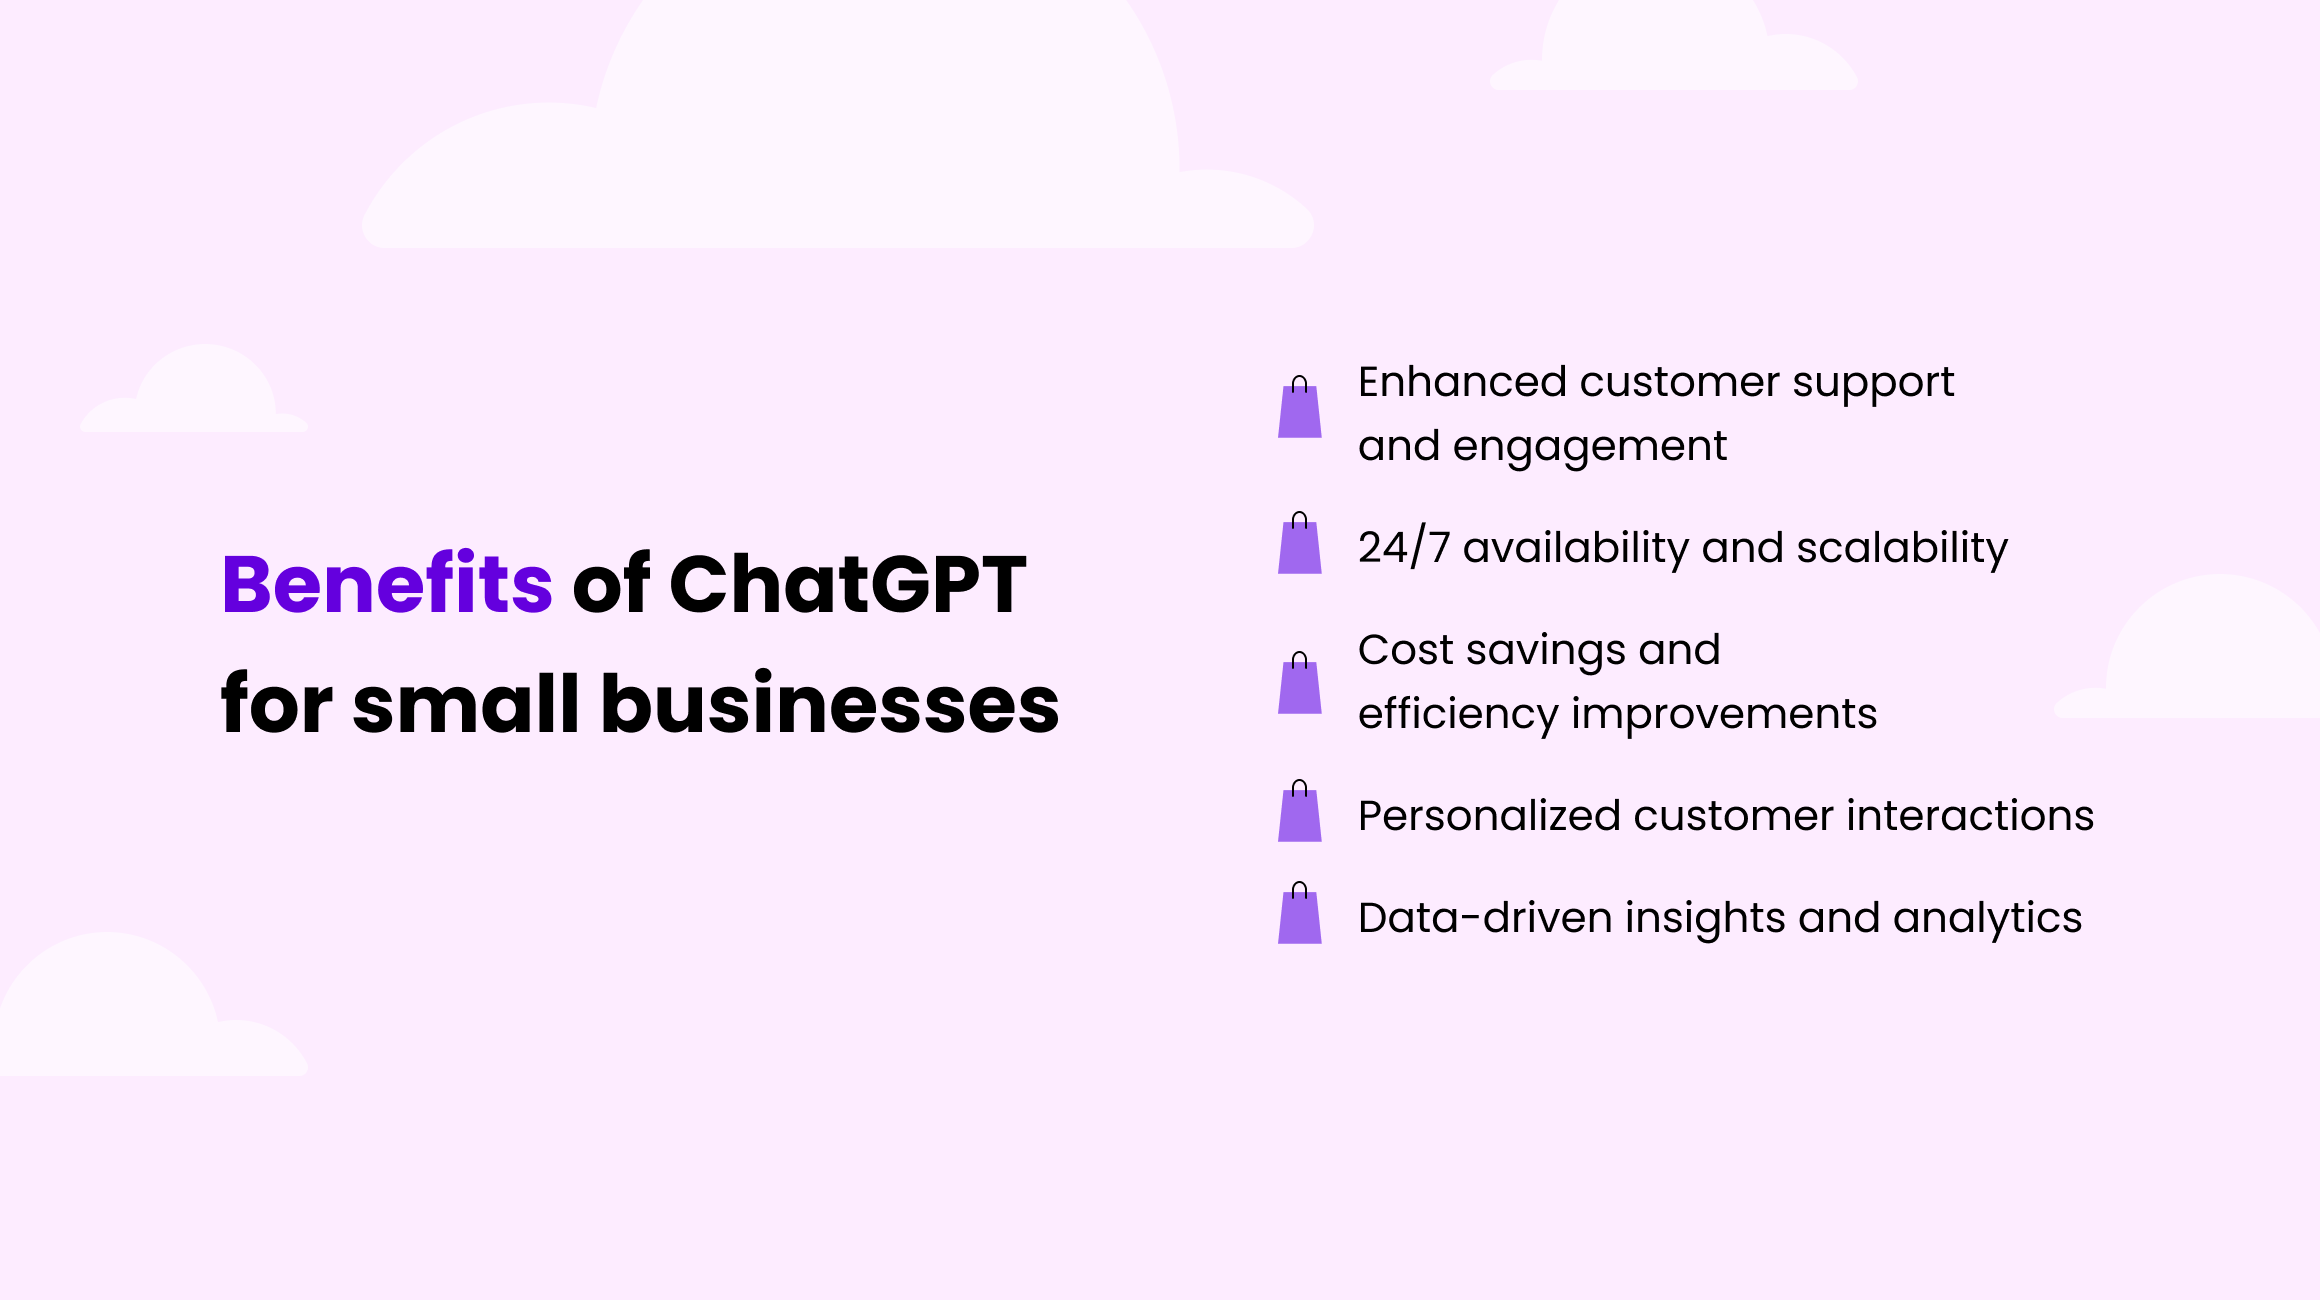 Benefits of ChatGPT for Small Businesses